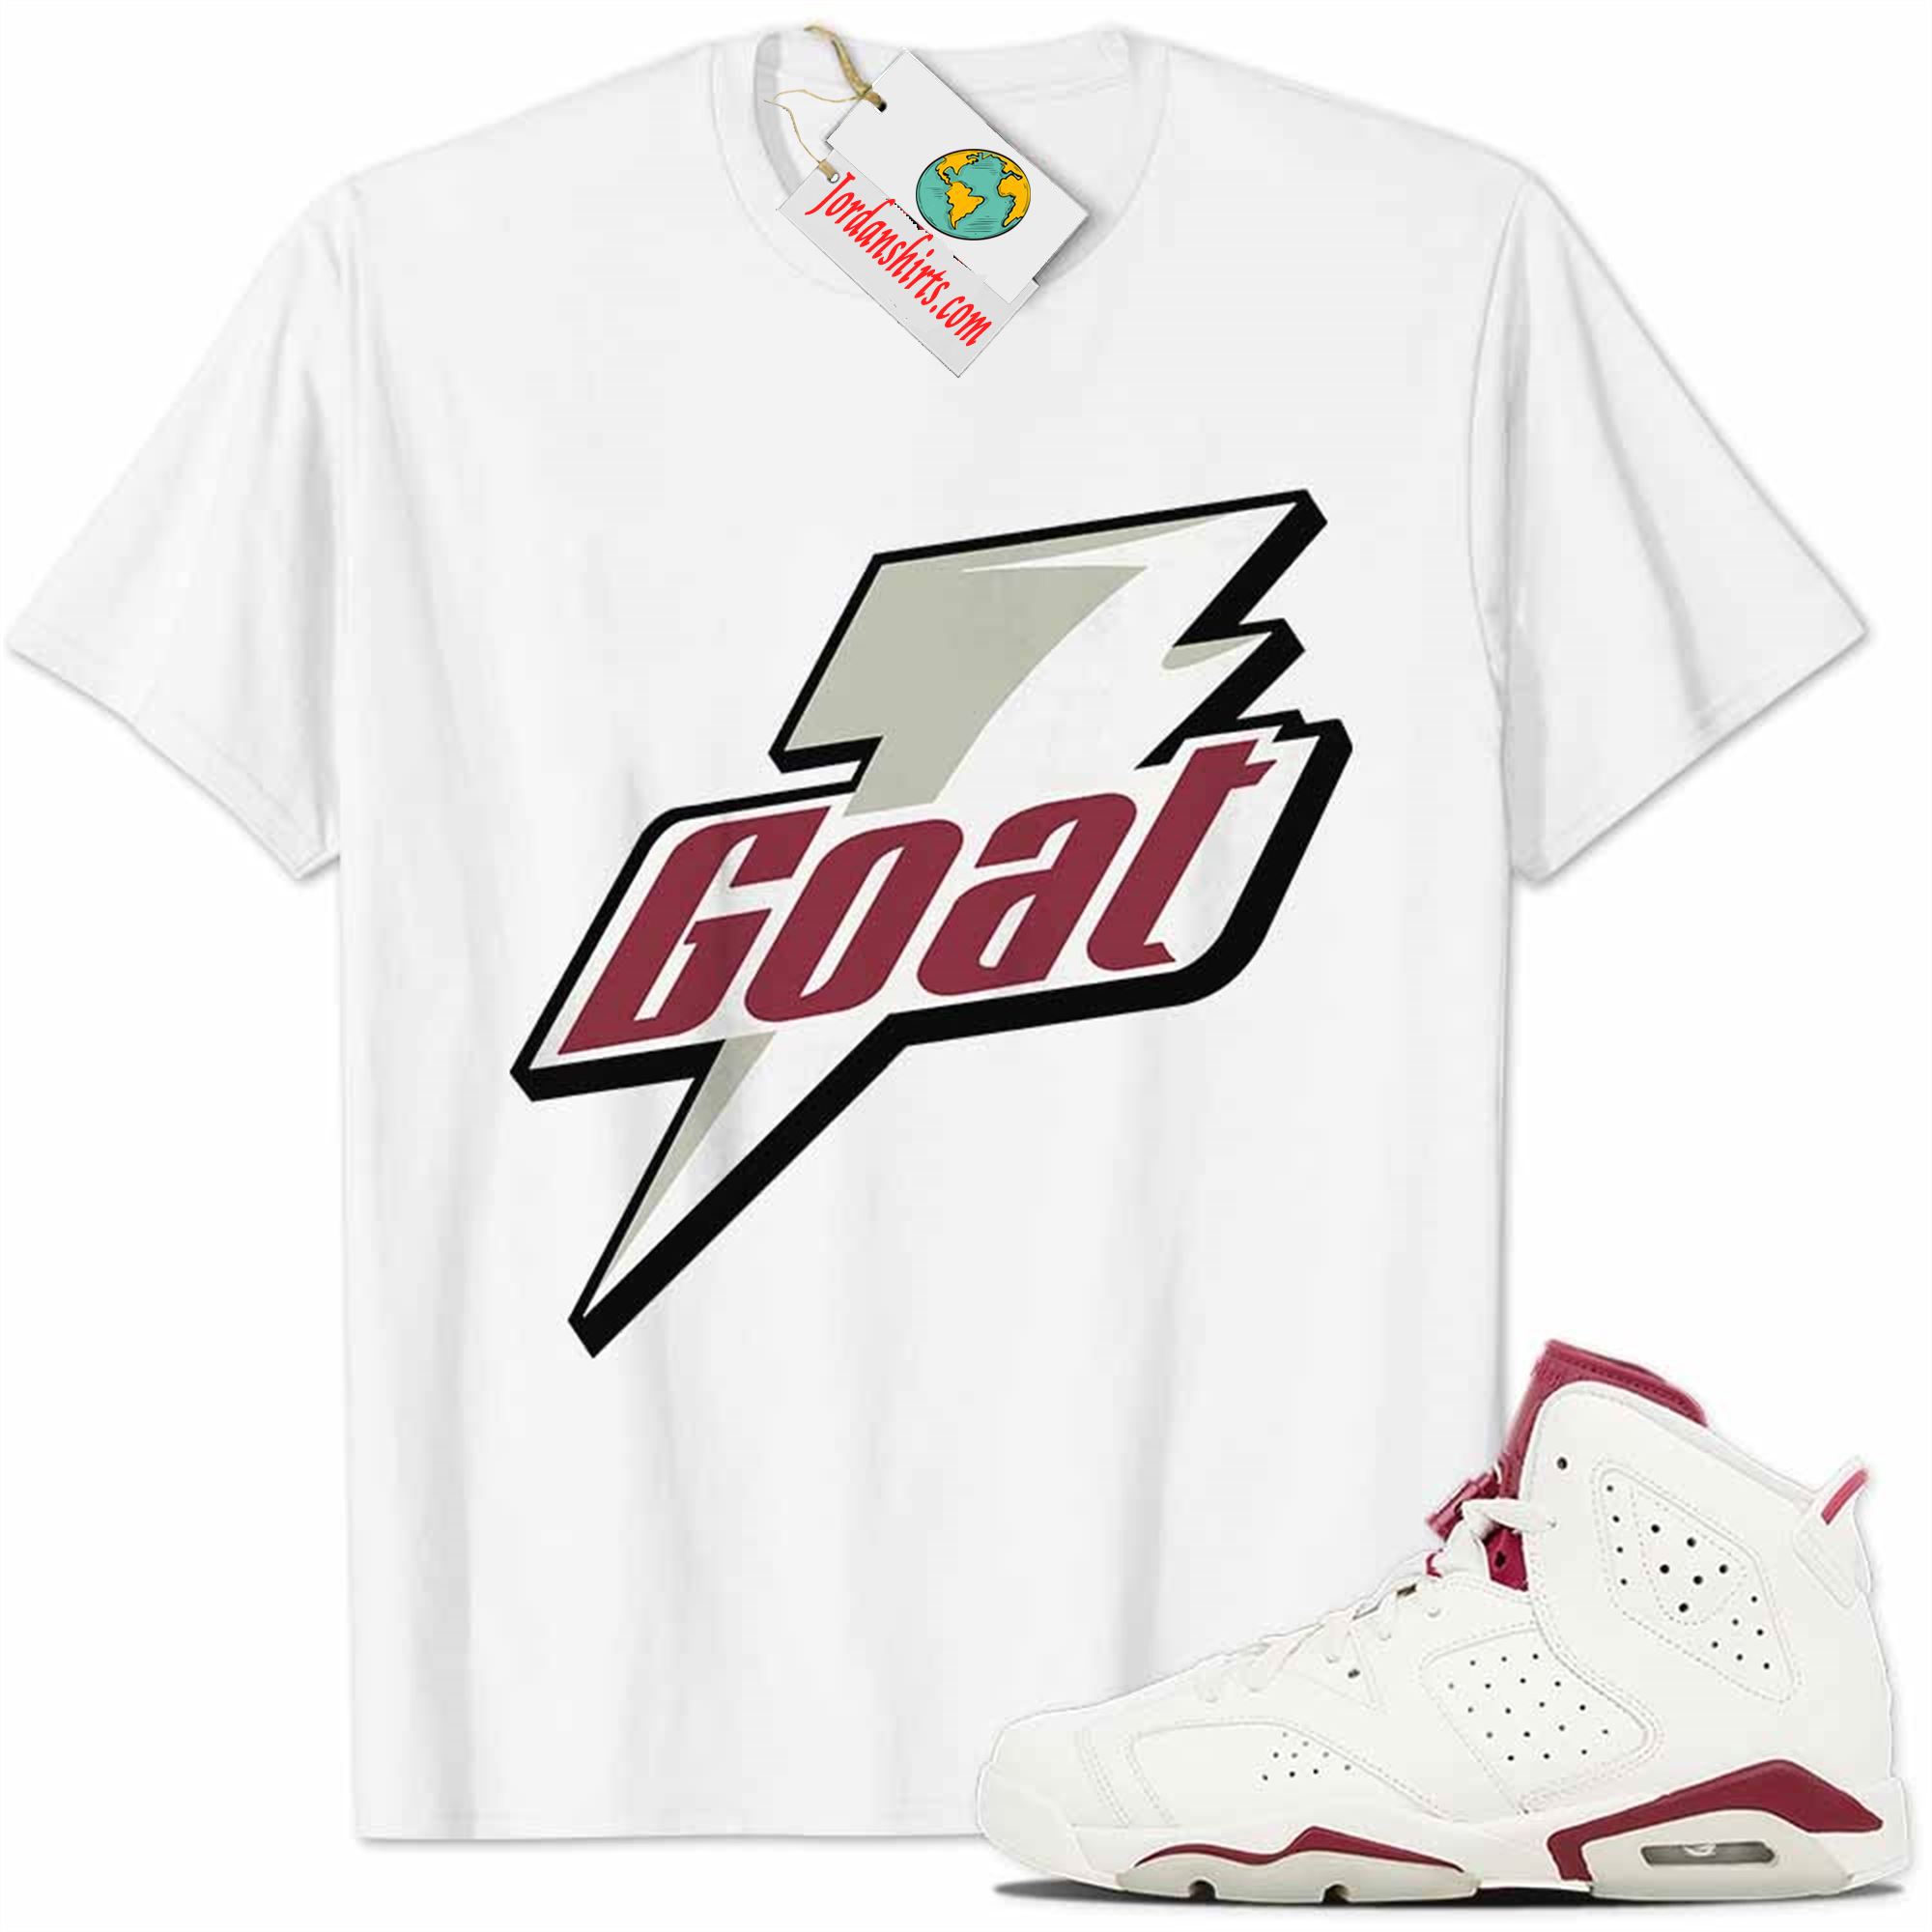 Jordan 6 Shirt, Maroon 6s Shirt Goat Greatest Of All Time White Plus Size Up To 5xl